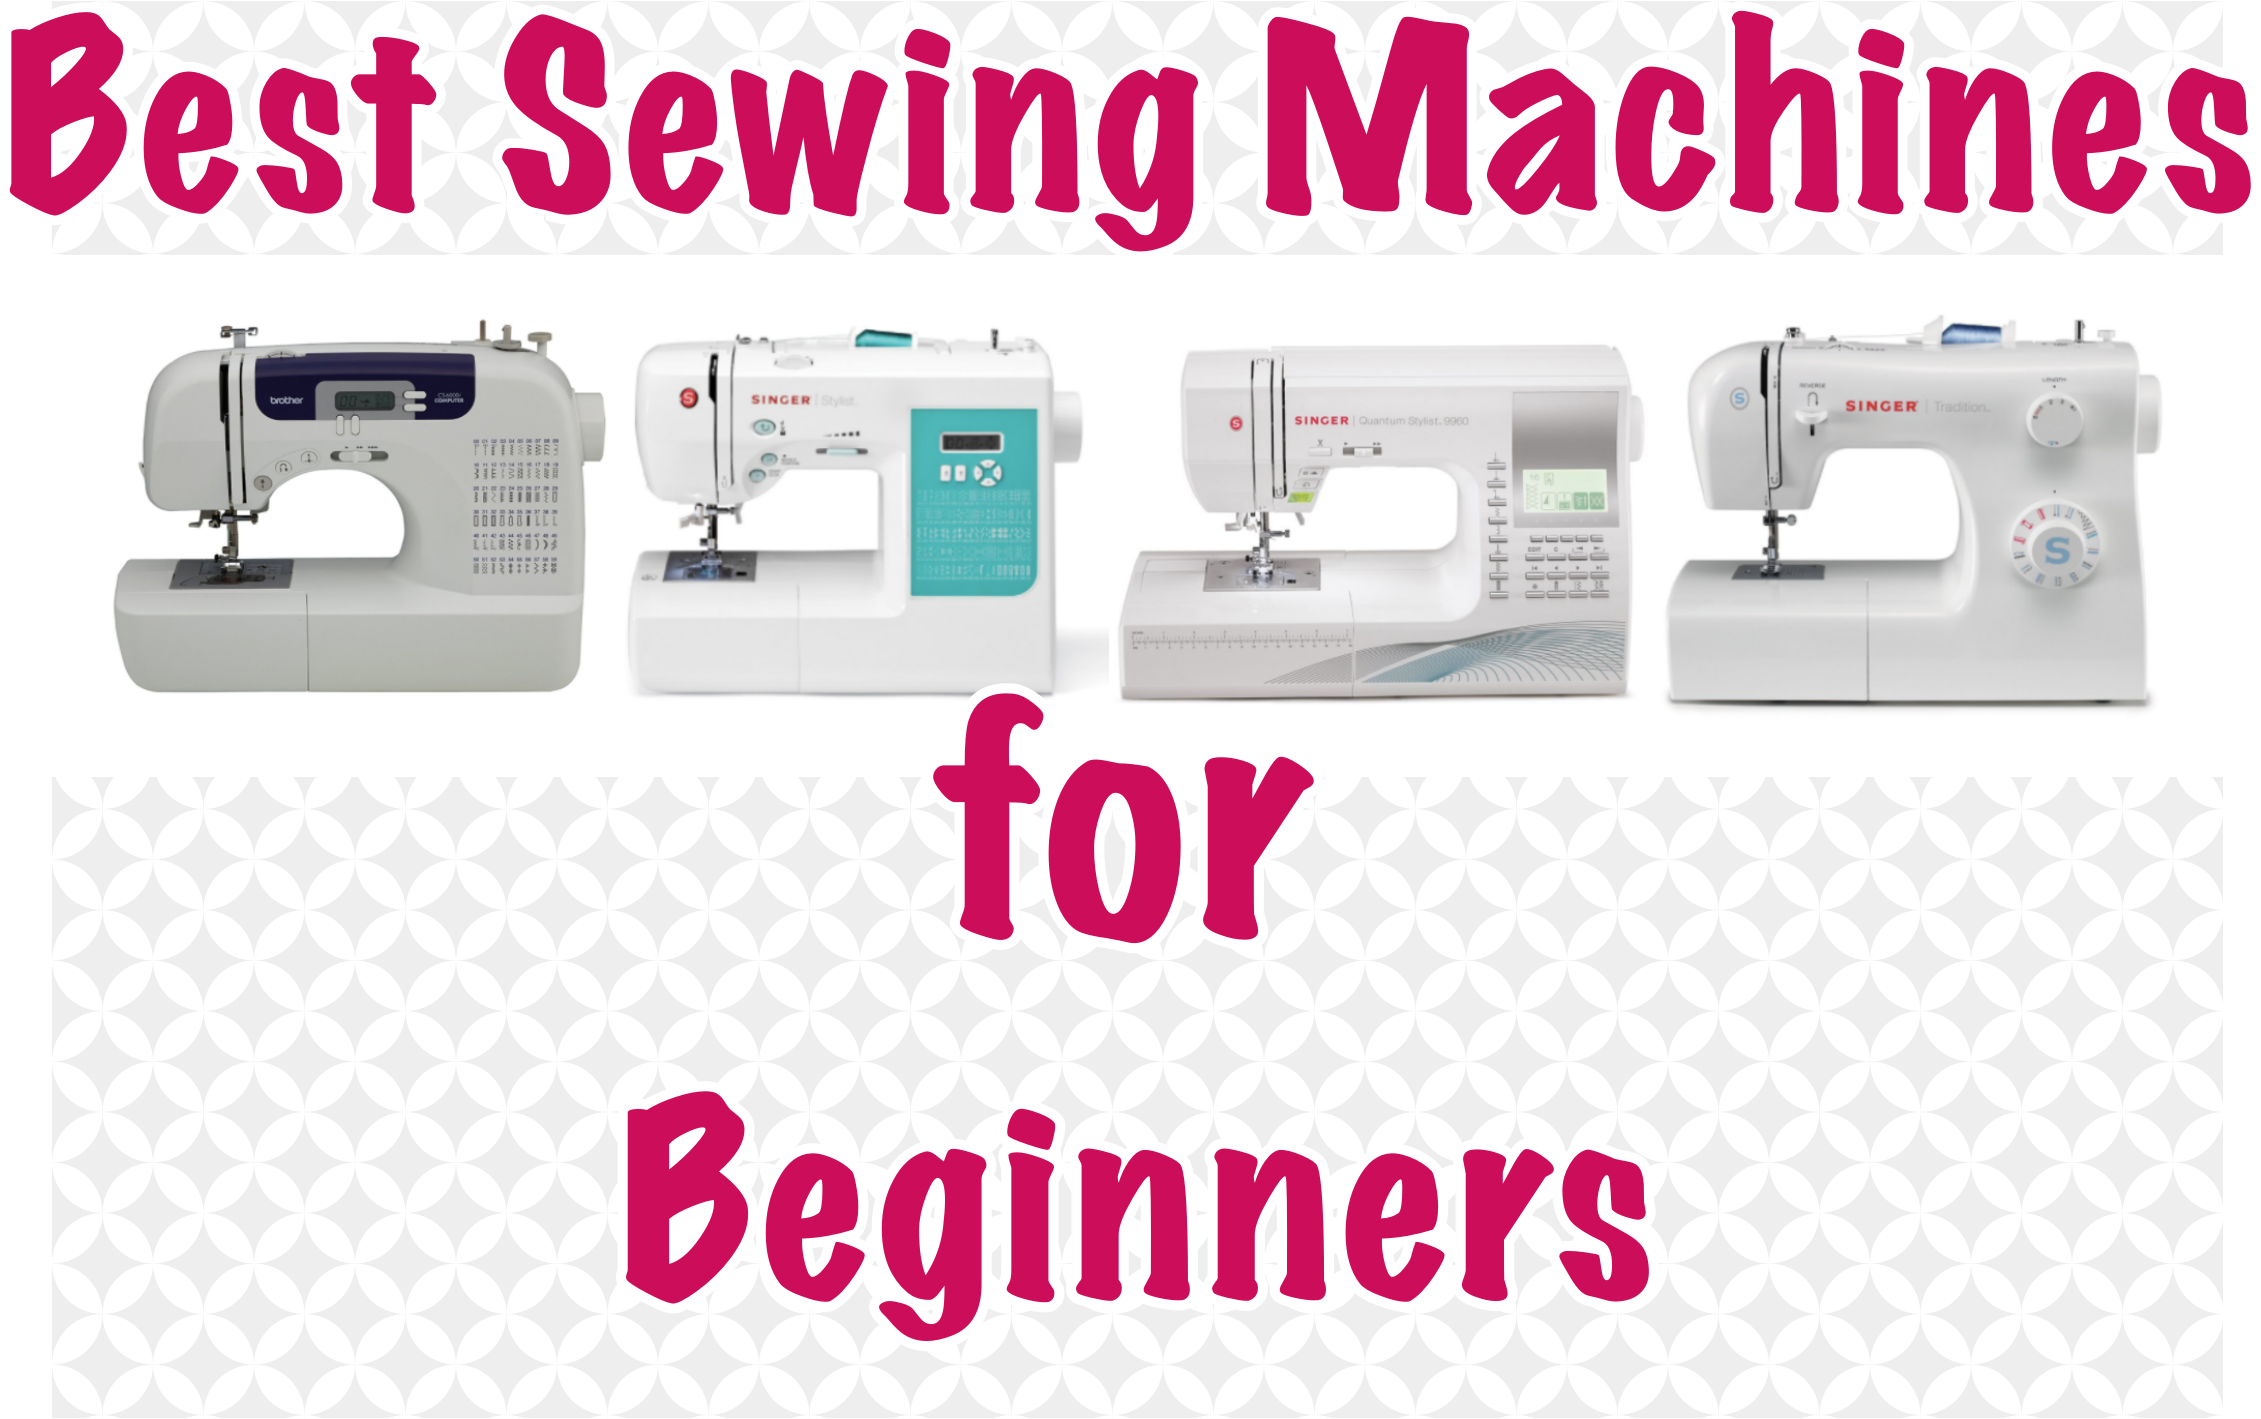 Best Sewing Machine for Beginners 2018 reviews